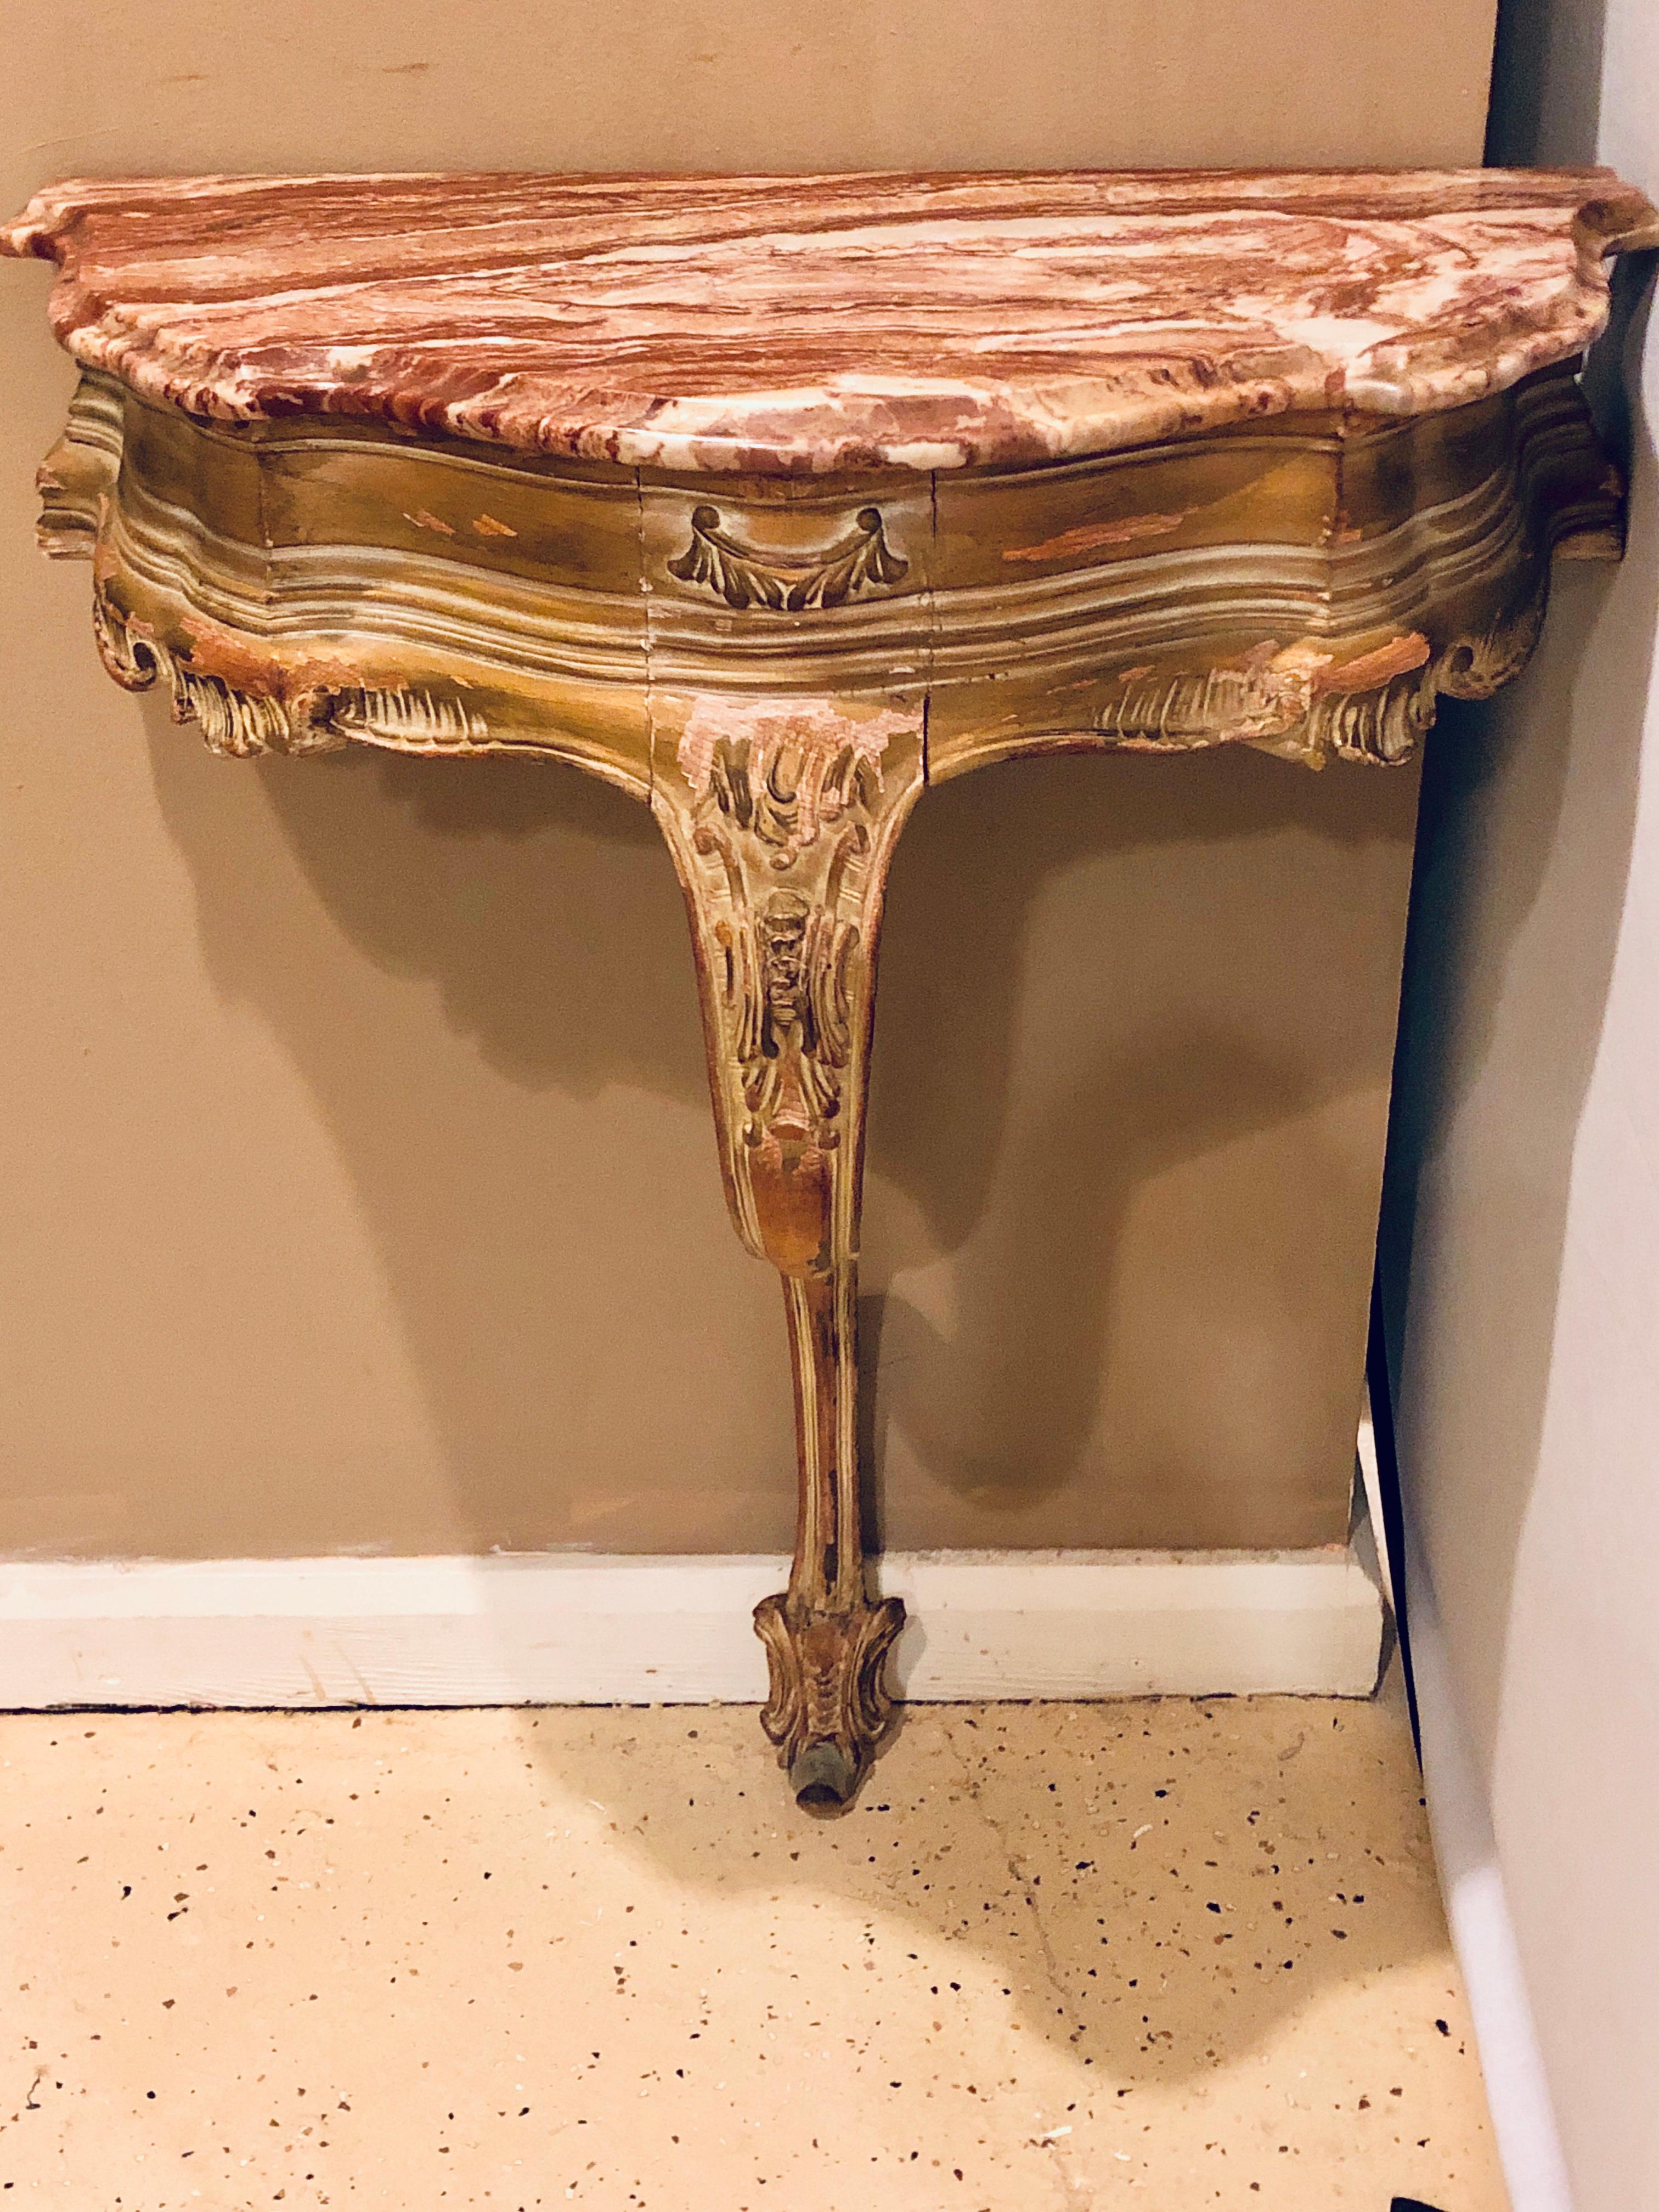  French Louis XV Style Distressed Antique Demi Lune Console with a Rouge Marble Top. This is a simply stunning worn and distressed late 19th century marble top console table having a demi lune form in the Louis XV Style. 